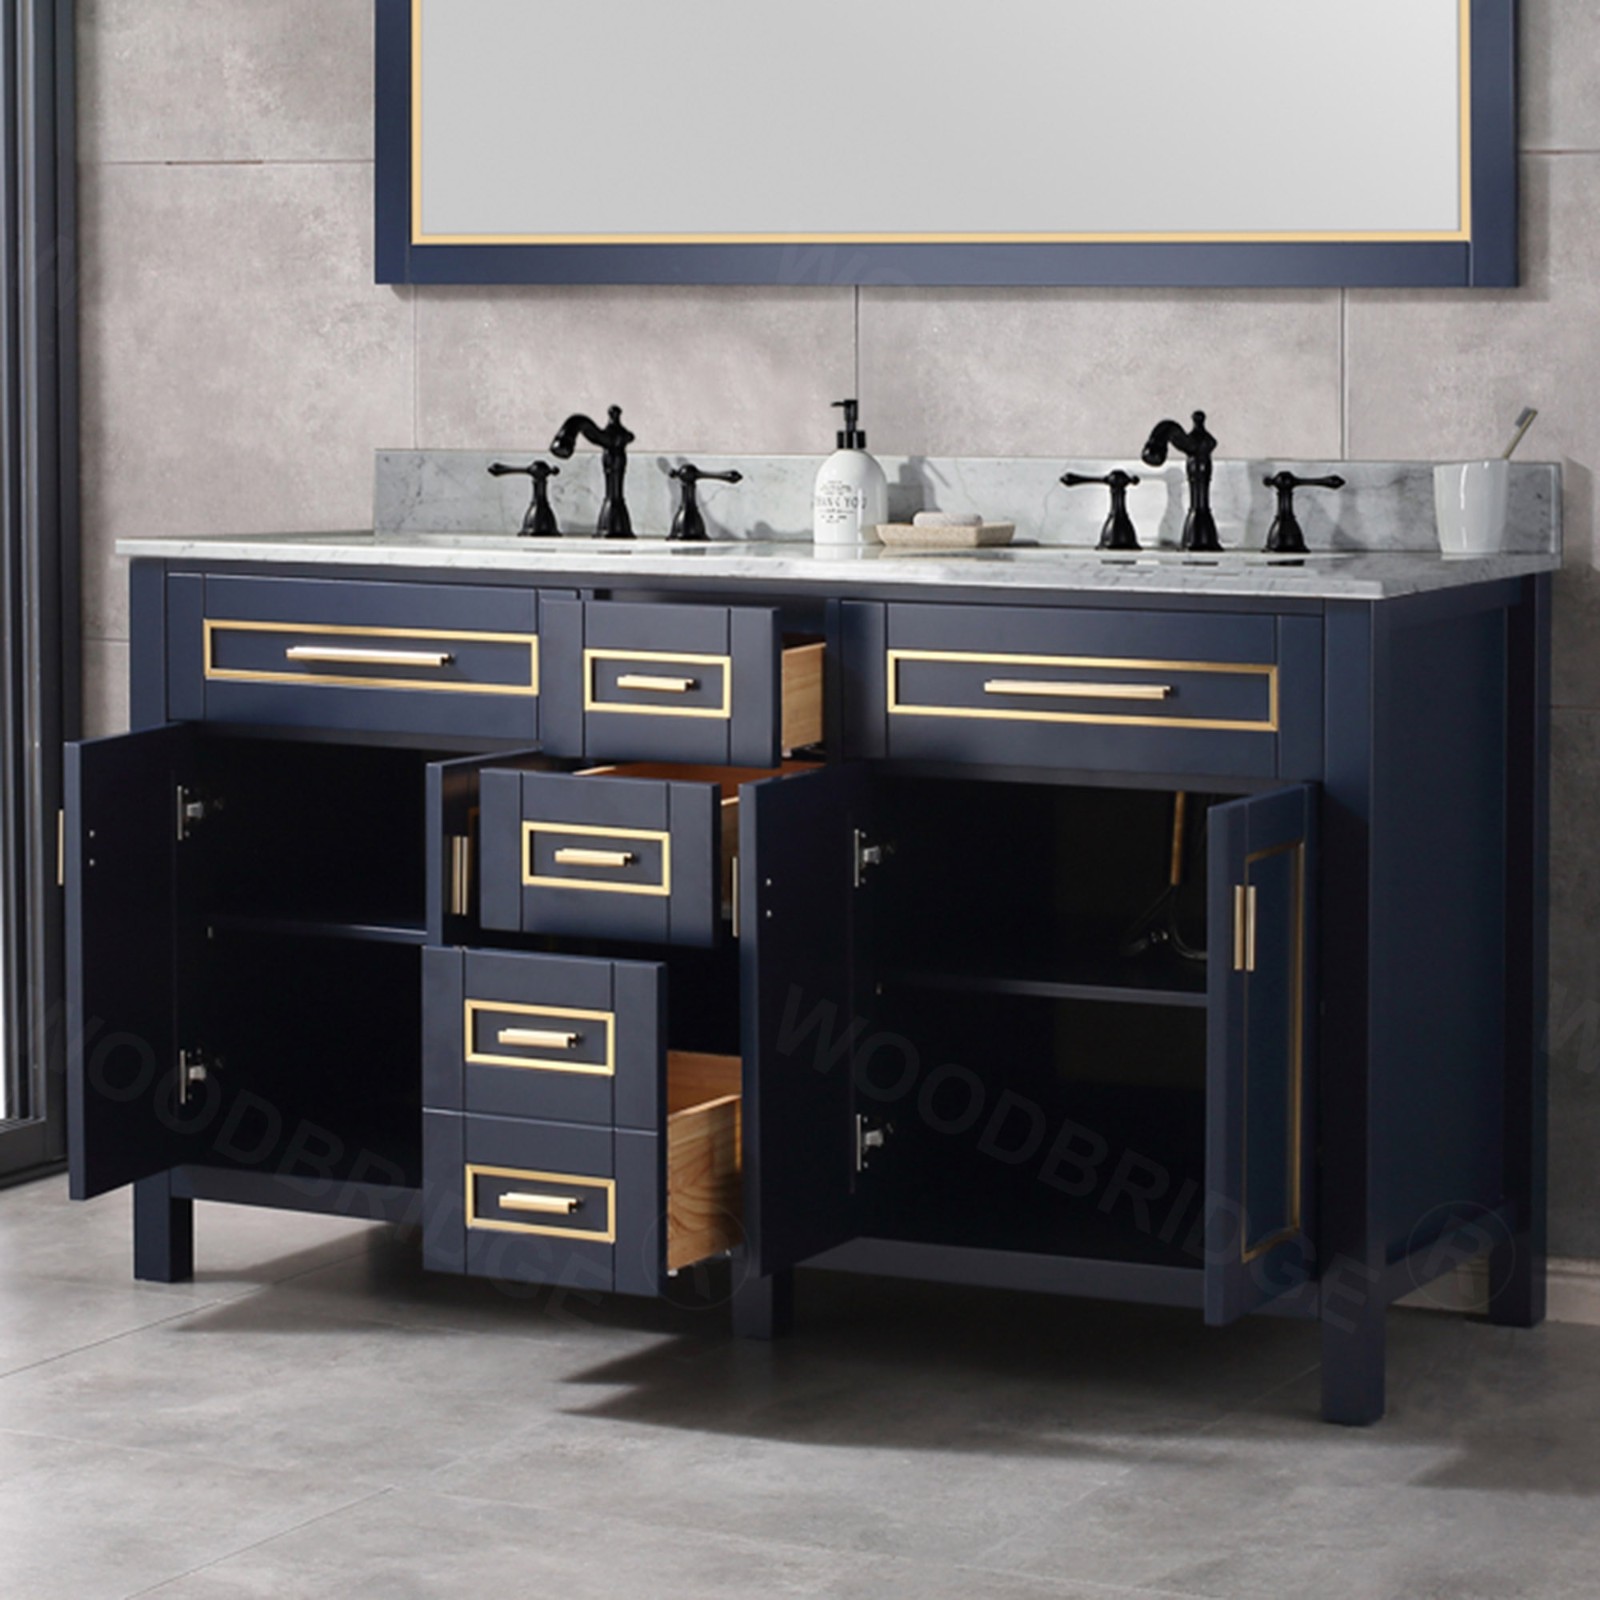  WOODBRIDGE Milan  61” Floor Mounted Single Basin Vanity Set with Solid Wood Cabinet in Navy Blue, and Carrara White Marble Vanity Top with Pre-installed Undermount Rectangle Bathroom Sink in White, Pre-Drilled 3-Hole for 4-inch Centerset Faucet_4655